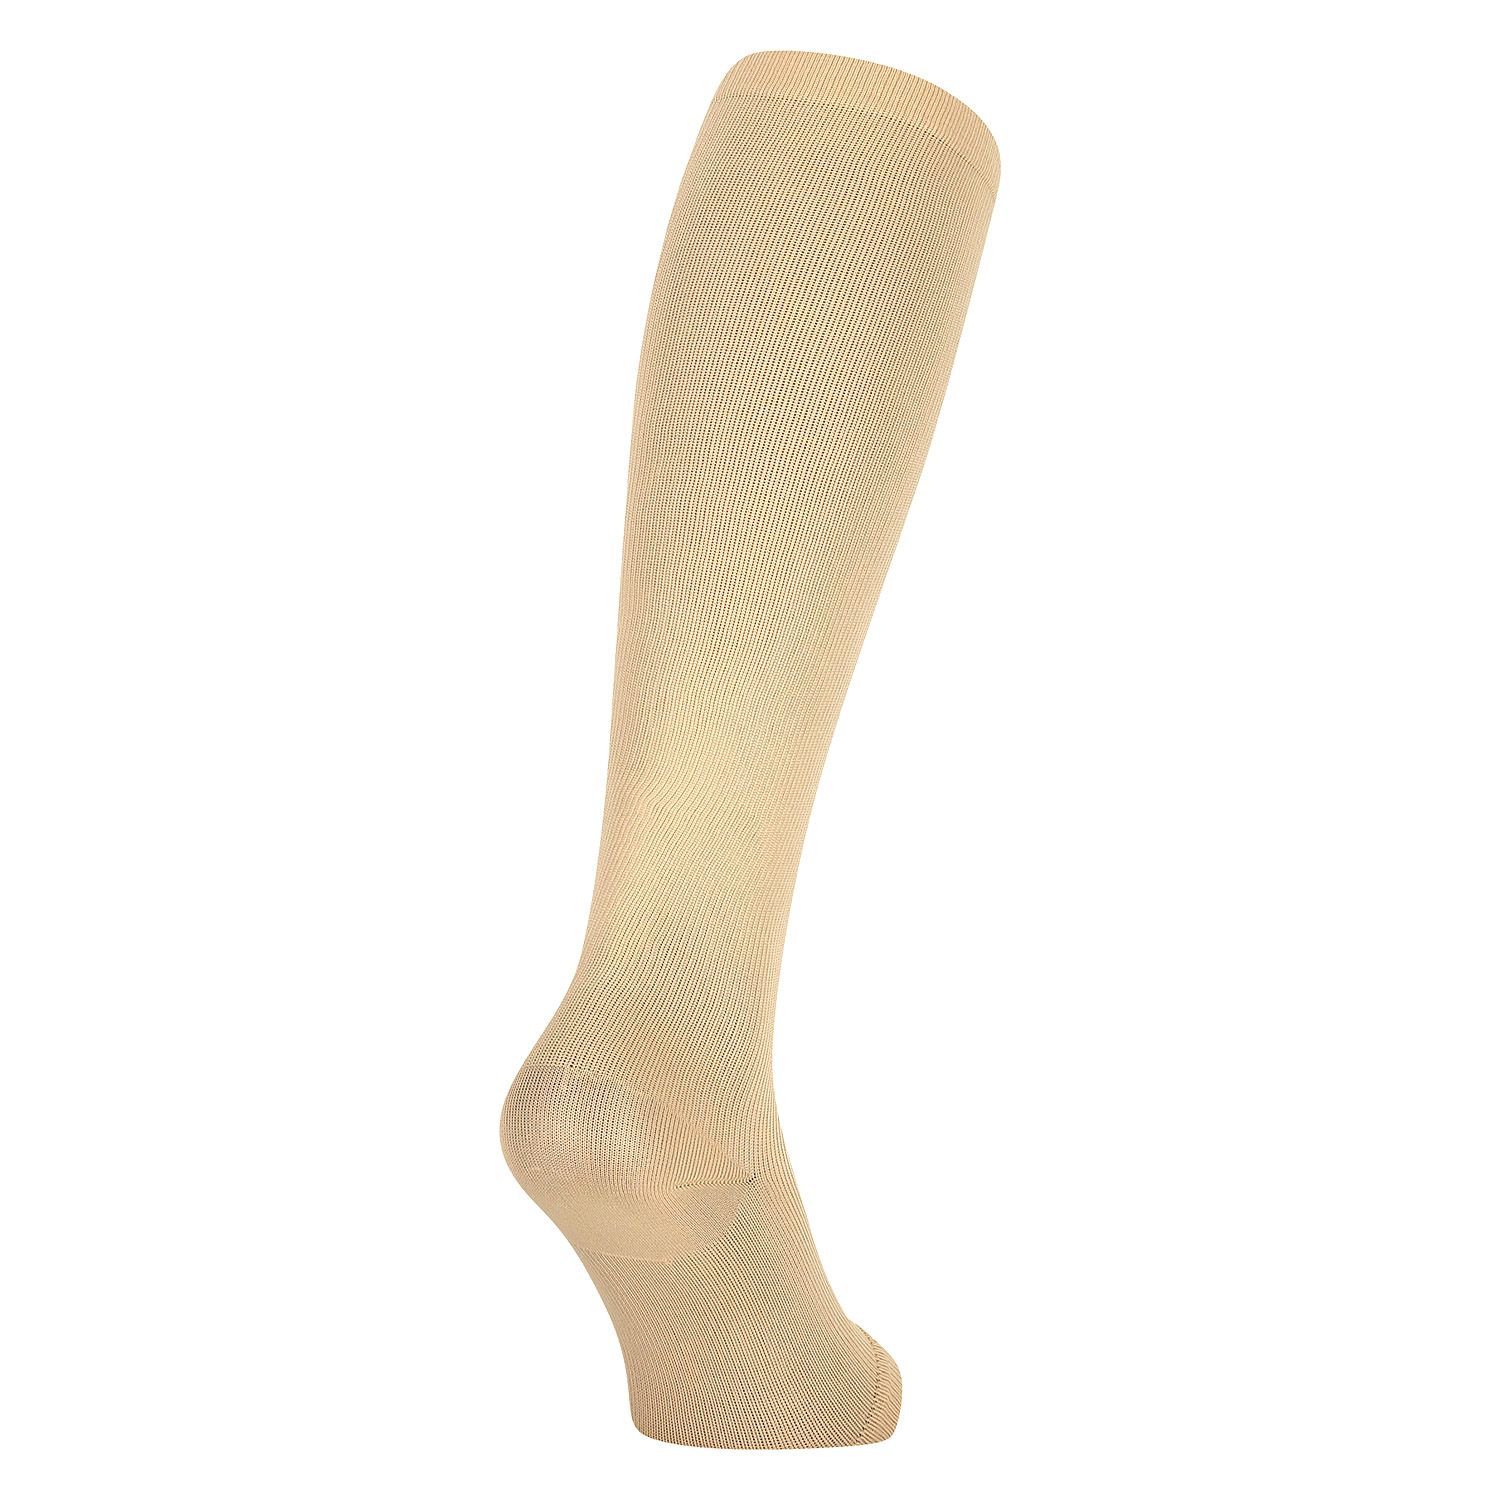 Support Stocking with Zipper - Open Toe - beige side view